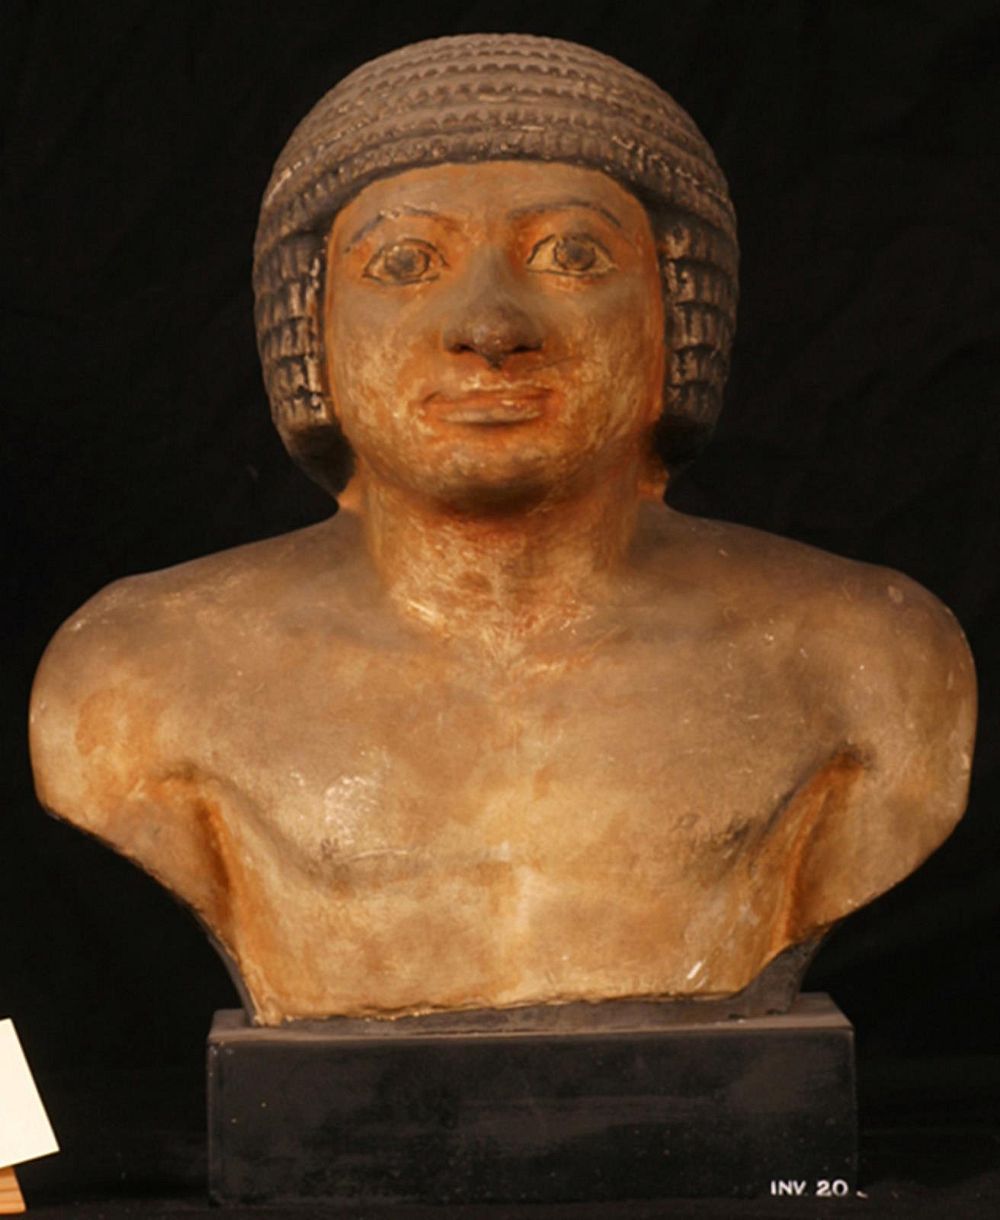 Torso of man with clean shaven face and wig